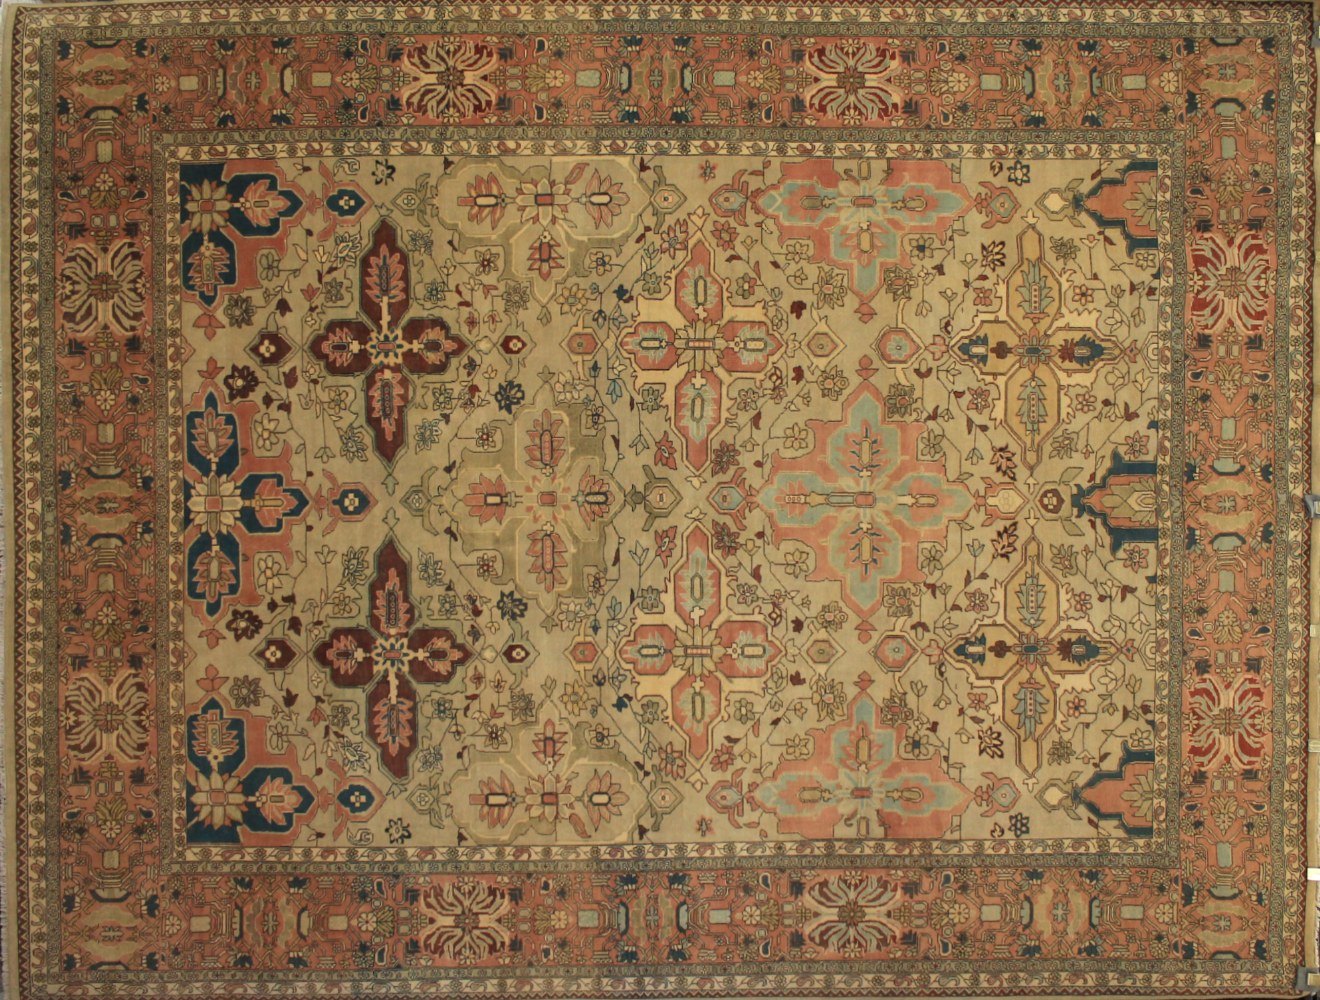 9x12 Antique Revival Hand Knotted Wool Area Rug - MR11538